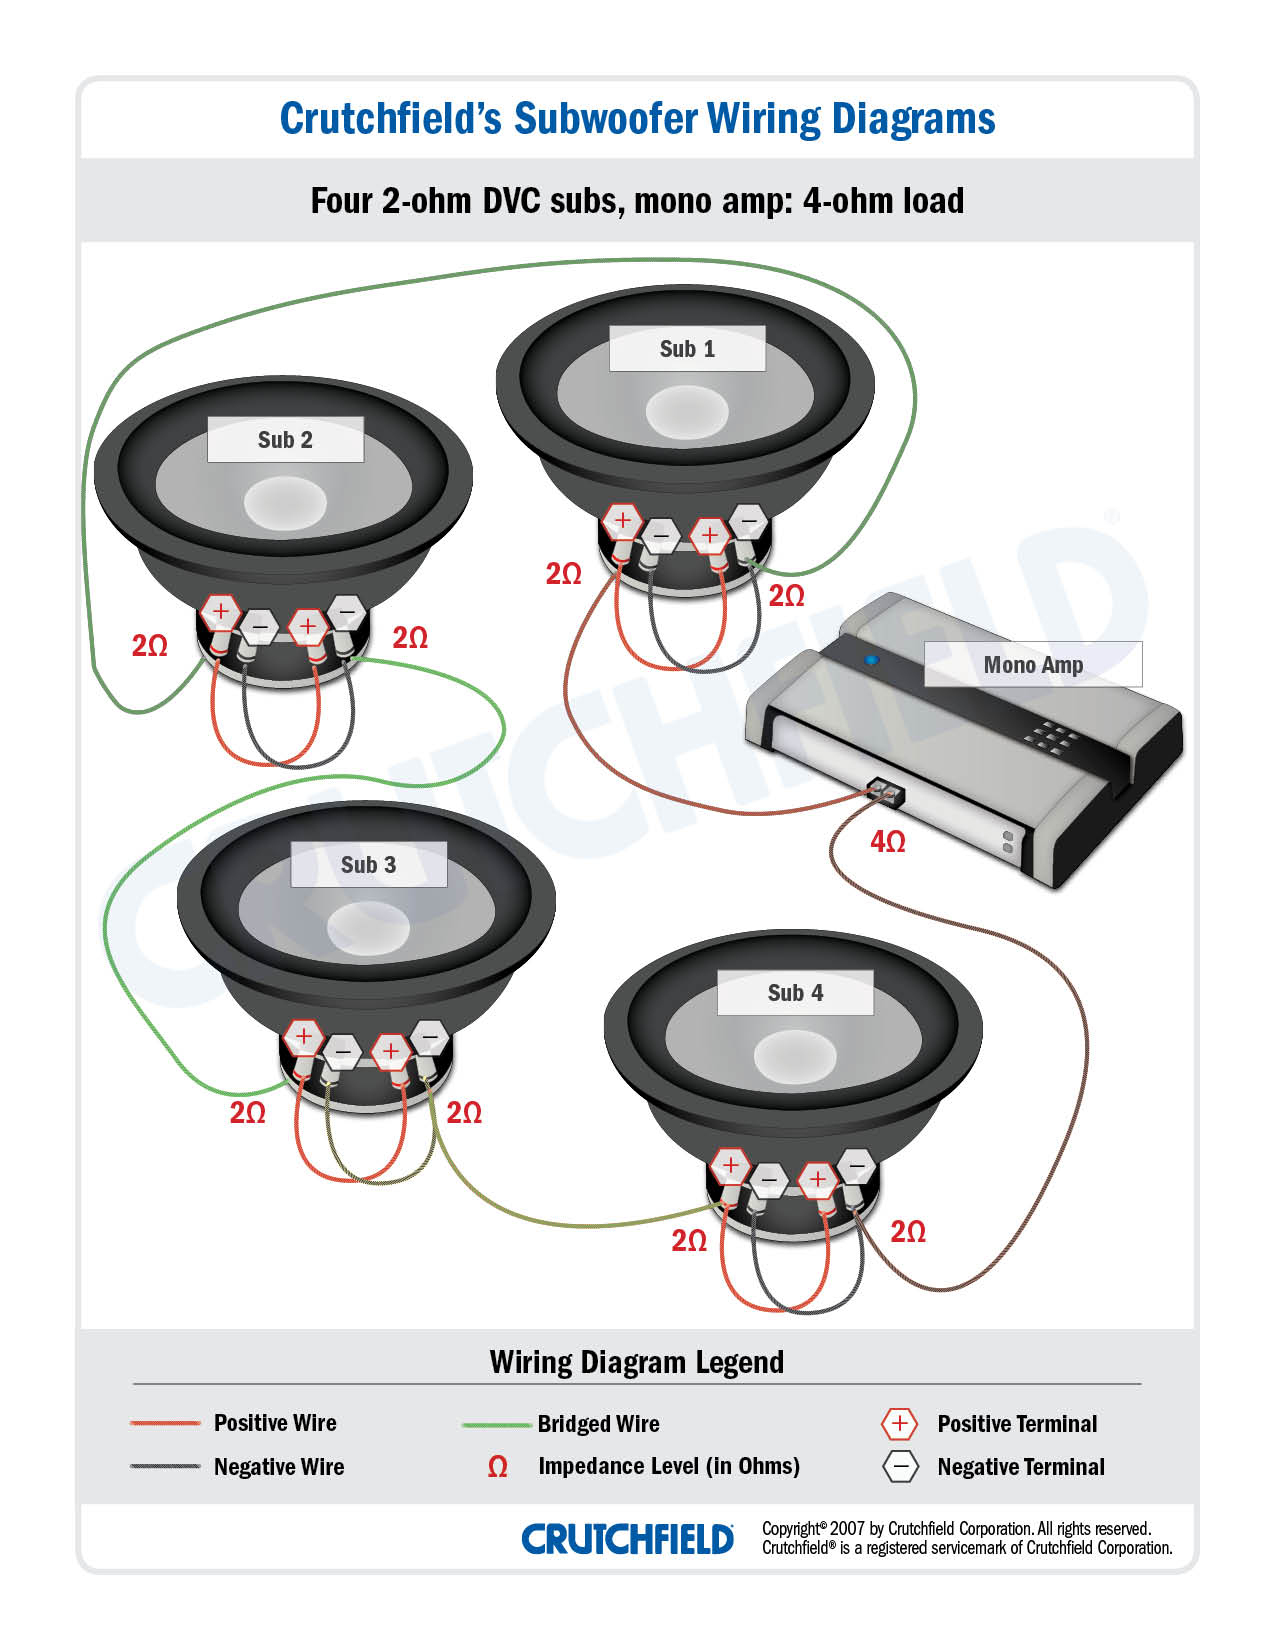 Subwoofer Wiring Diagrams — How To Wire Your Subs - Sub Wiring Diagram